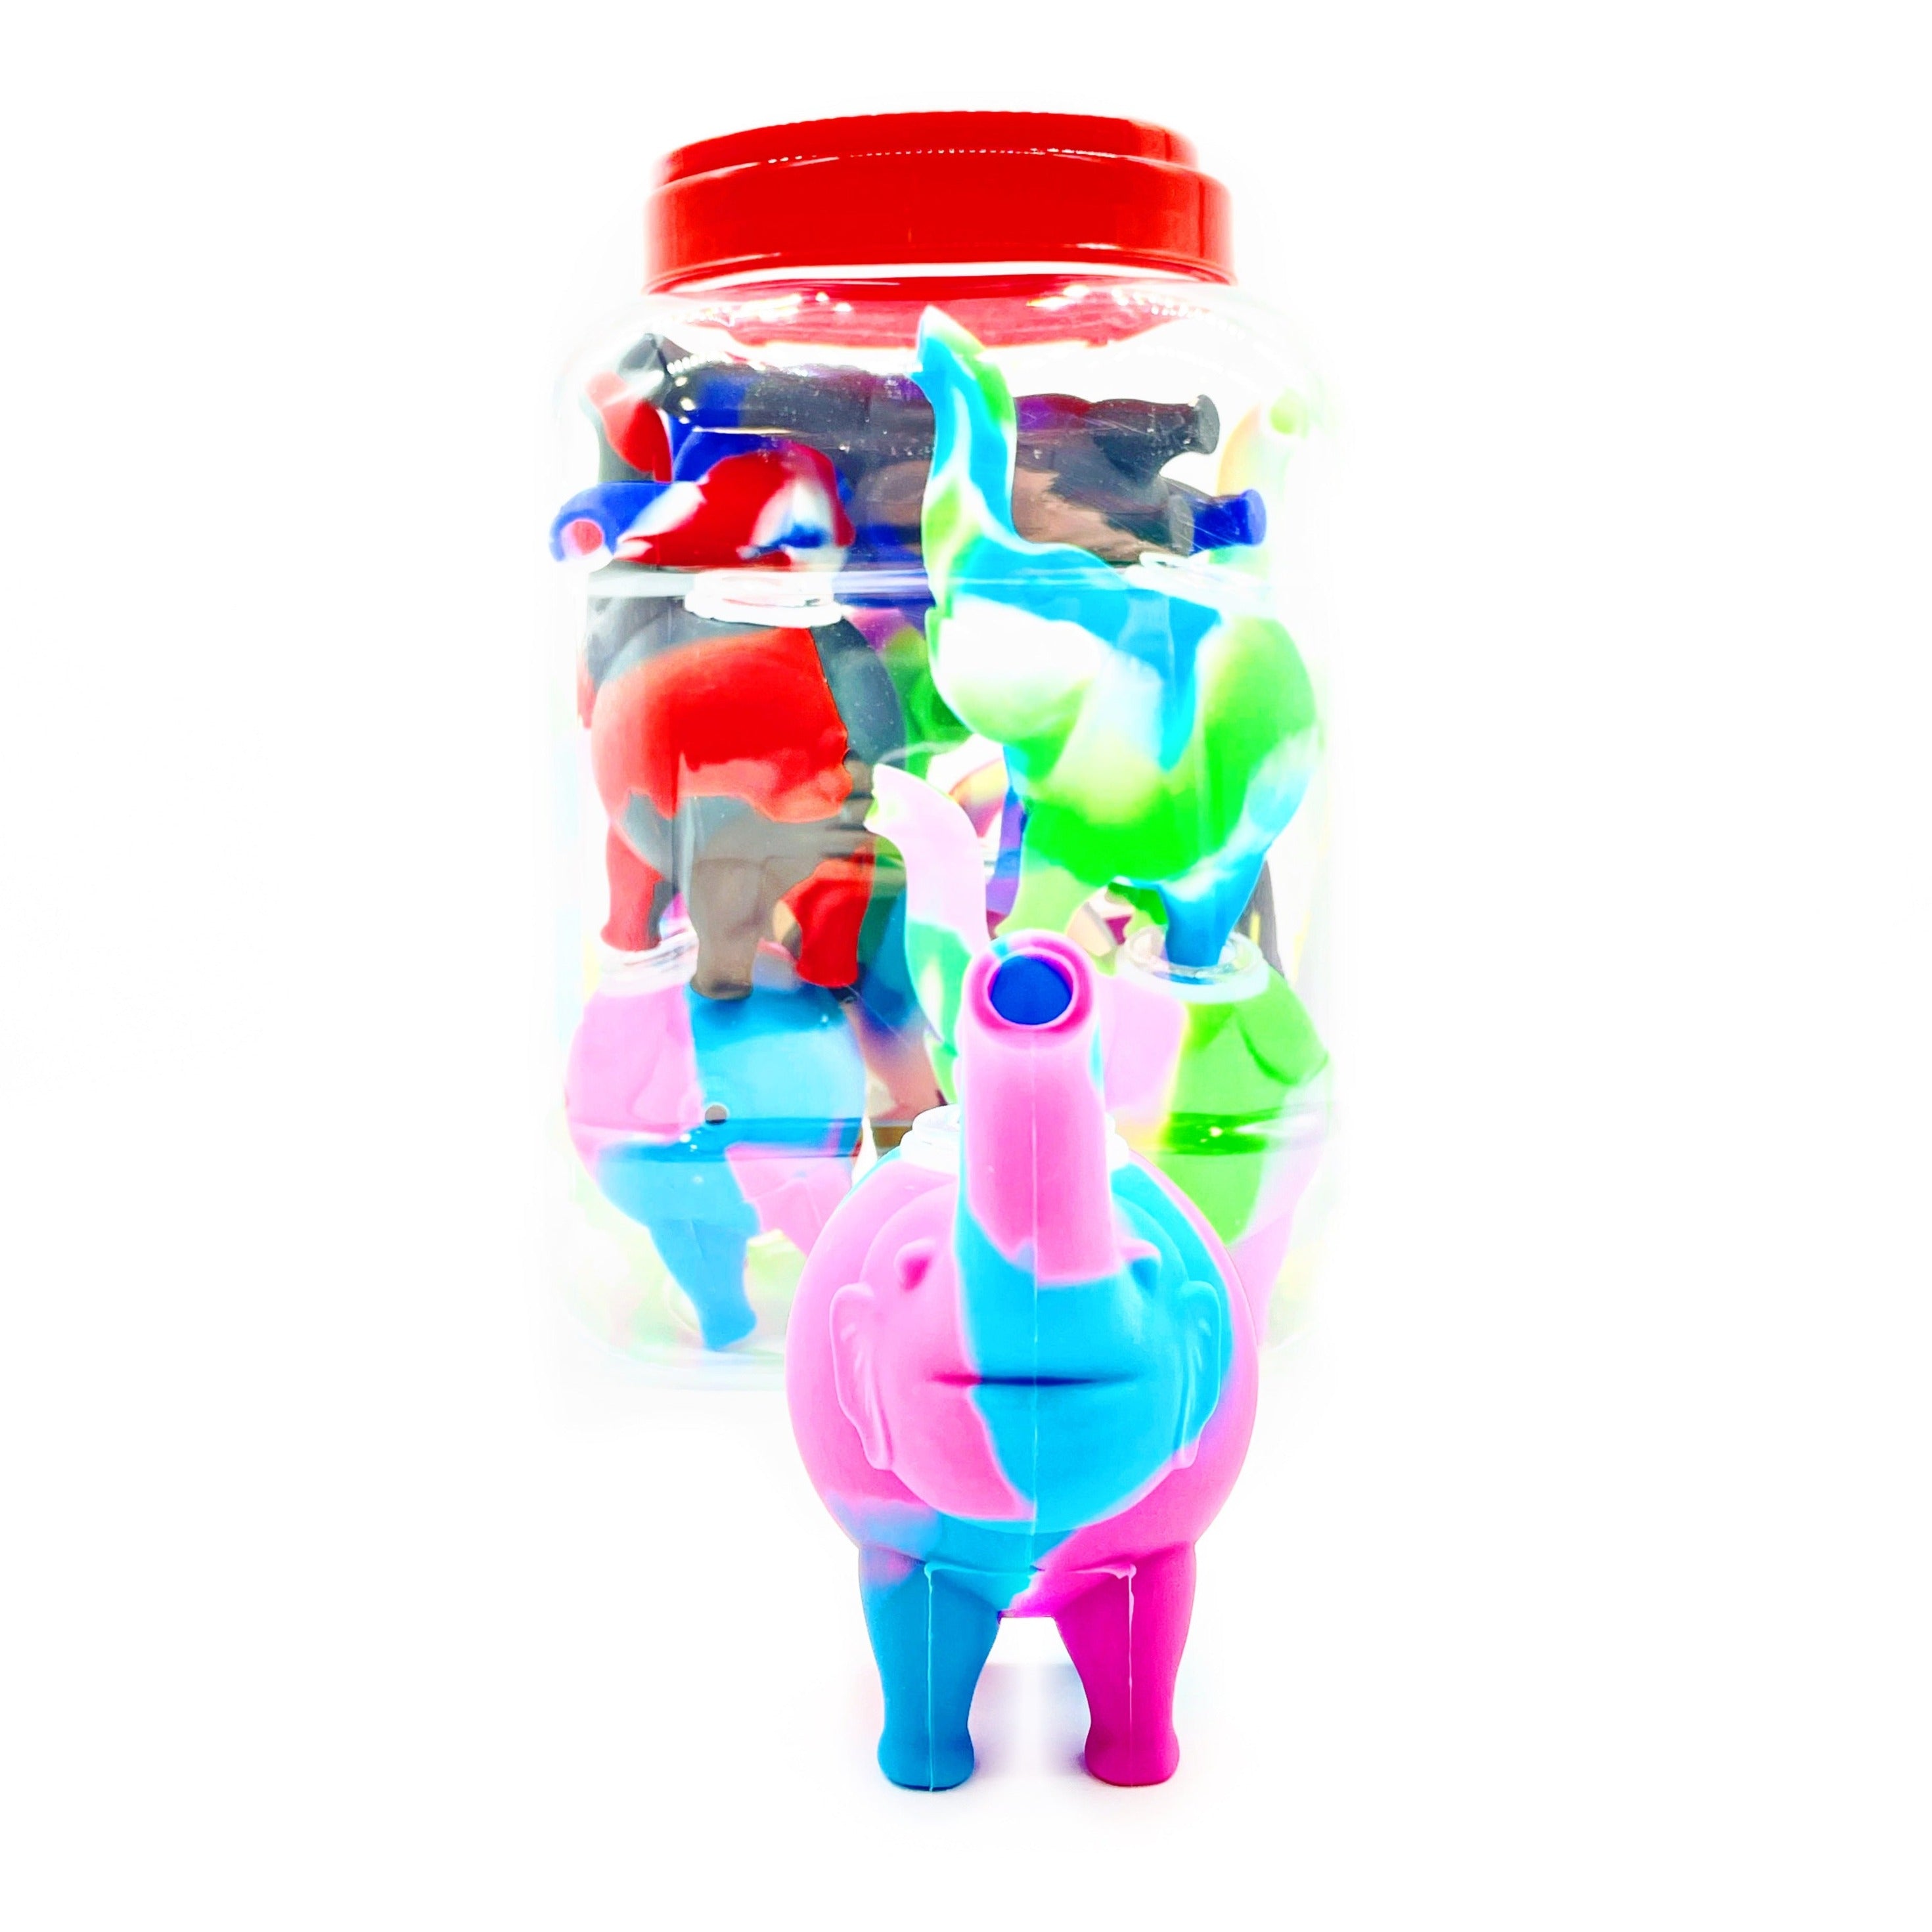 Assorted Colored Elephant Silicone Pipes with Glass Bowls Wholesale - 1 Jar / 12pcs